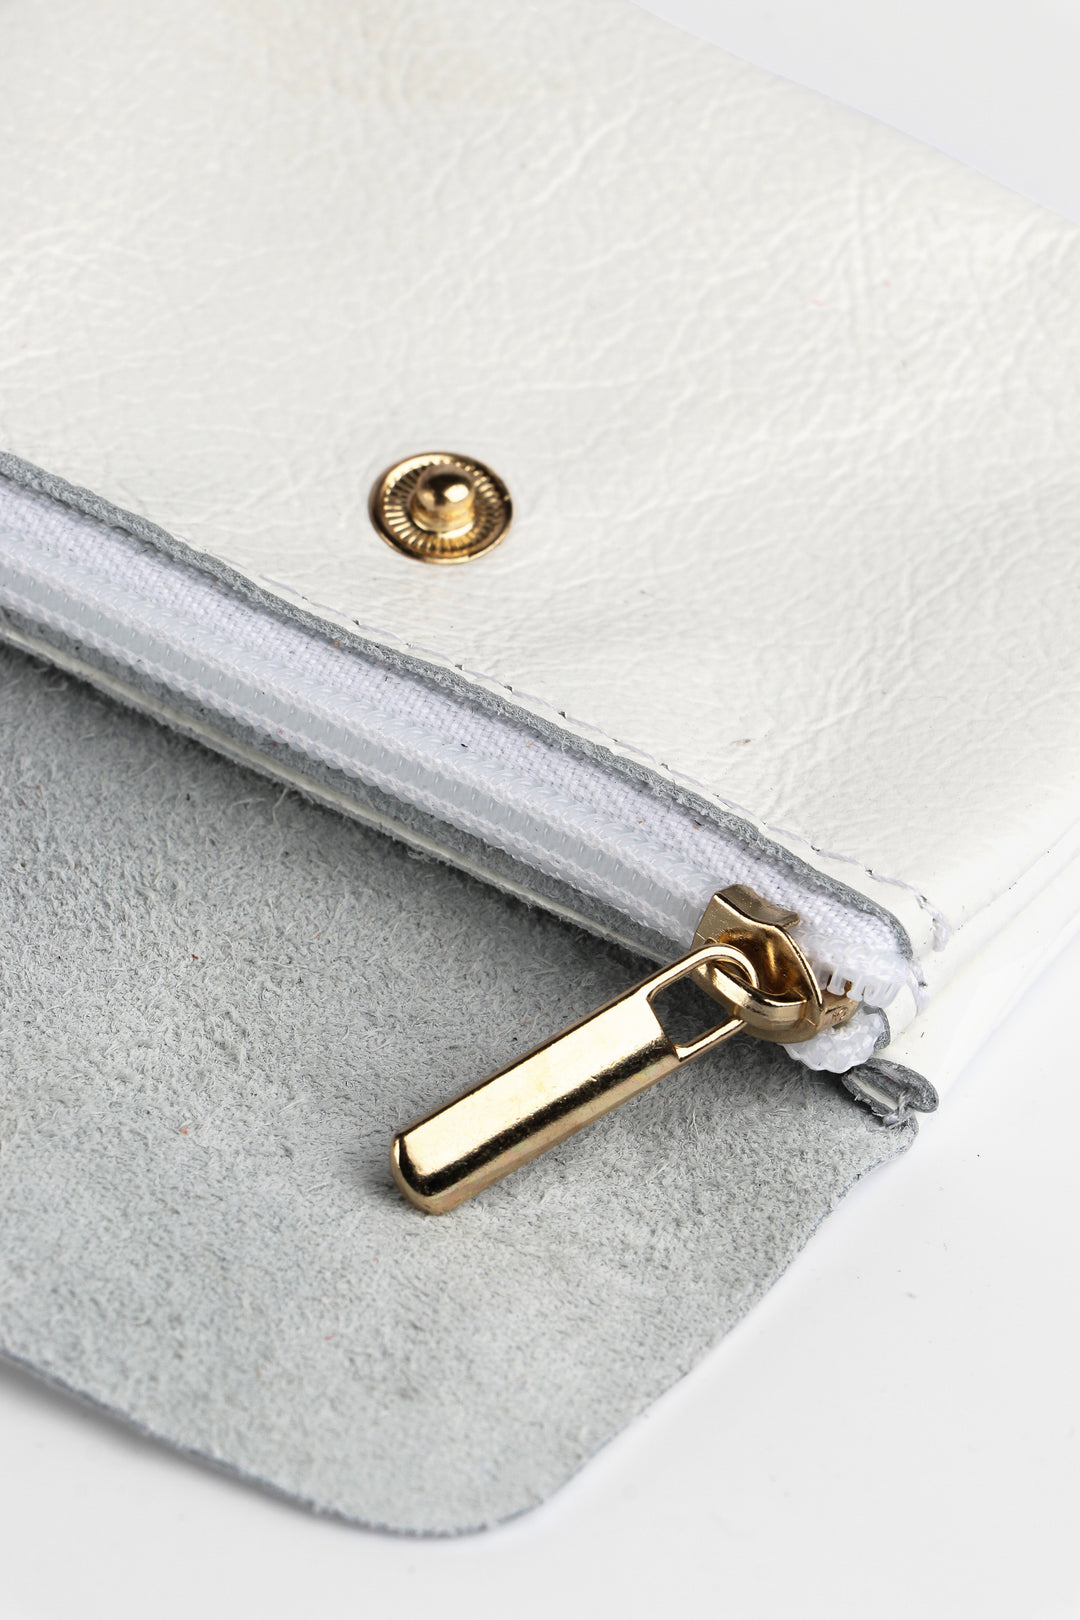 showing the inside of the white leather coin purse and the secure zip closure